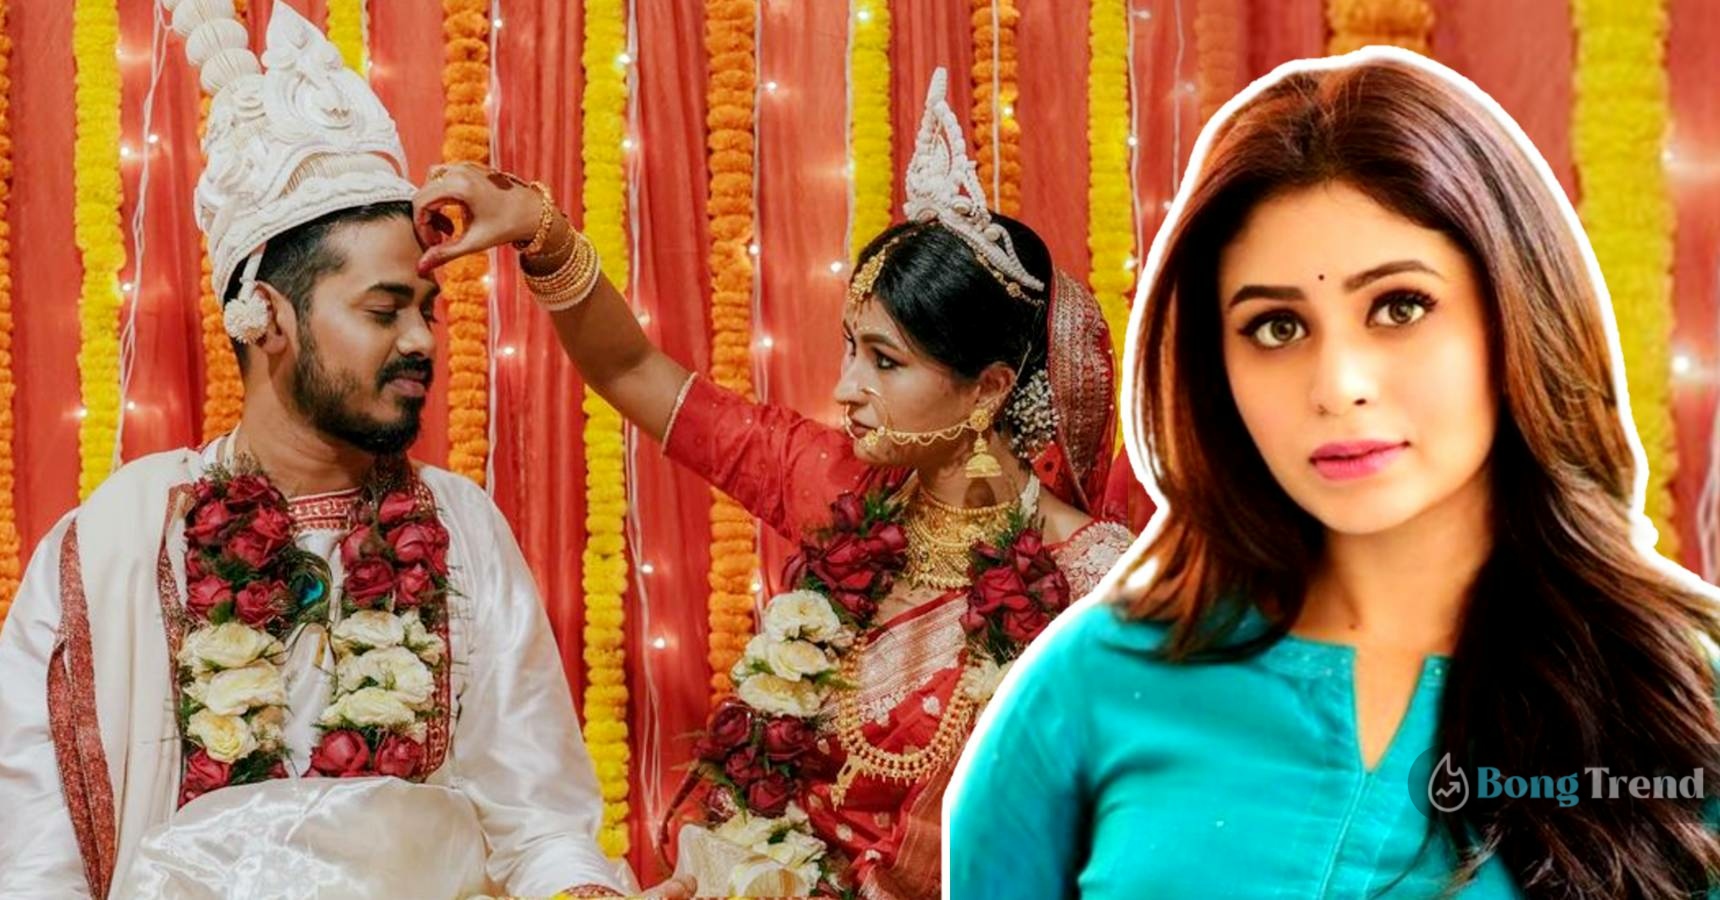 Tollywood actress Ritabhari Chakraborty’s sister Chitrangada Chakraborty trolled after her marriage pictures gone viral